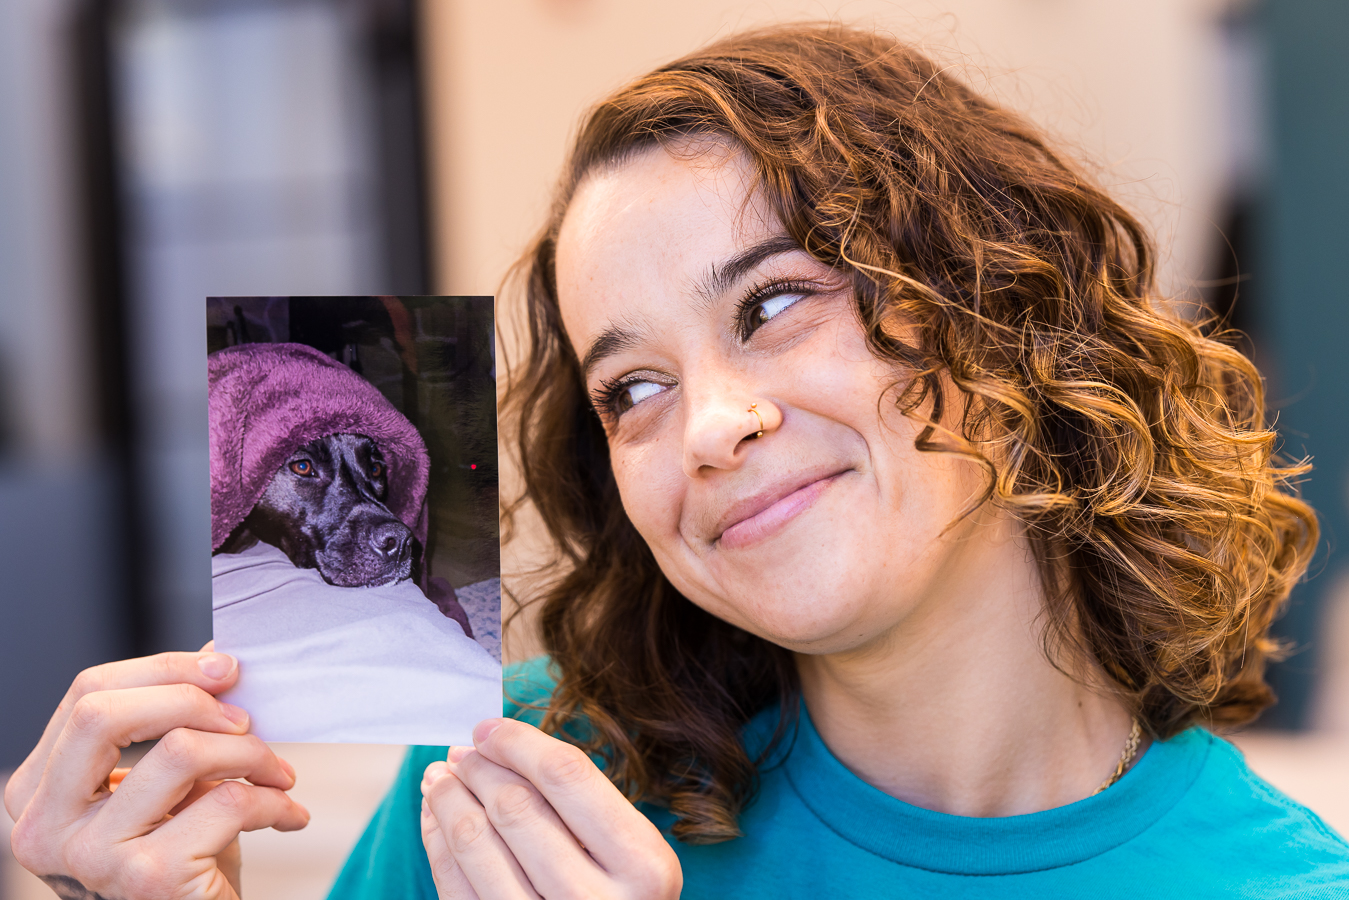 lisa rhinehart, social media photographer, captures this image of a dental assistant as she holds up a picture of her dog and smiles at it during her Social media content session 